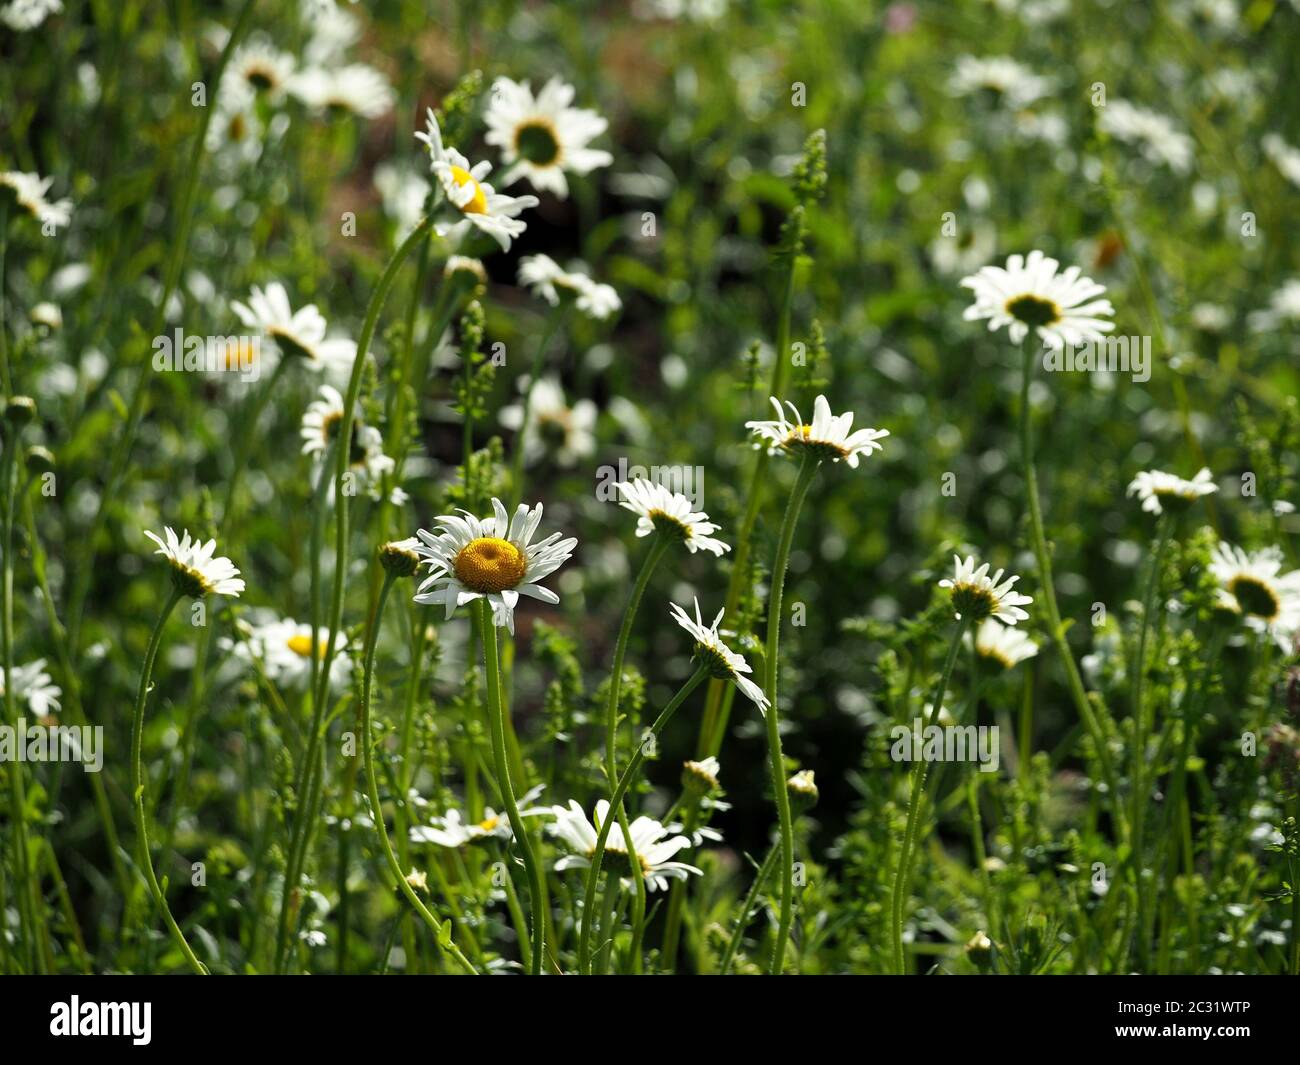 Mass of bright white and yellow flowers of Ox-eye Daisy or Dog Daisy (Leucanthemum vulgare) in sunny green wildflower meadow in Cumbria, England, UK Stock Photo